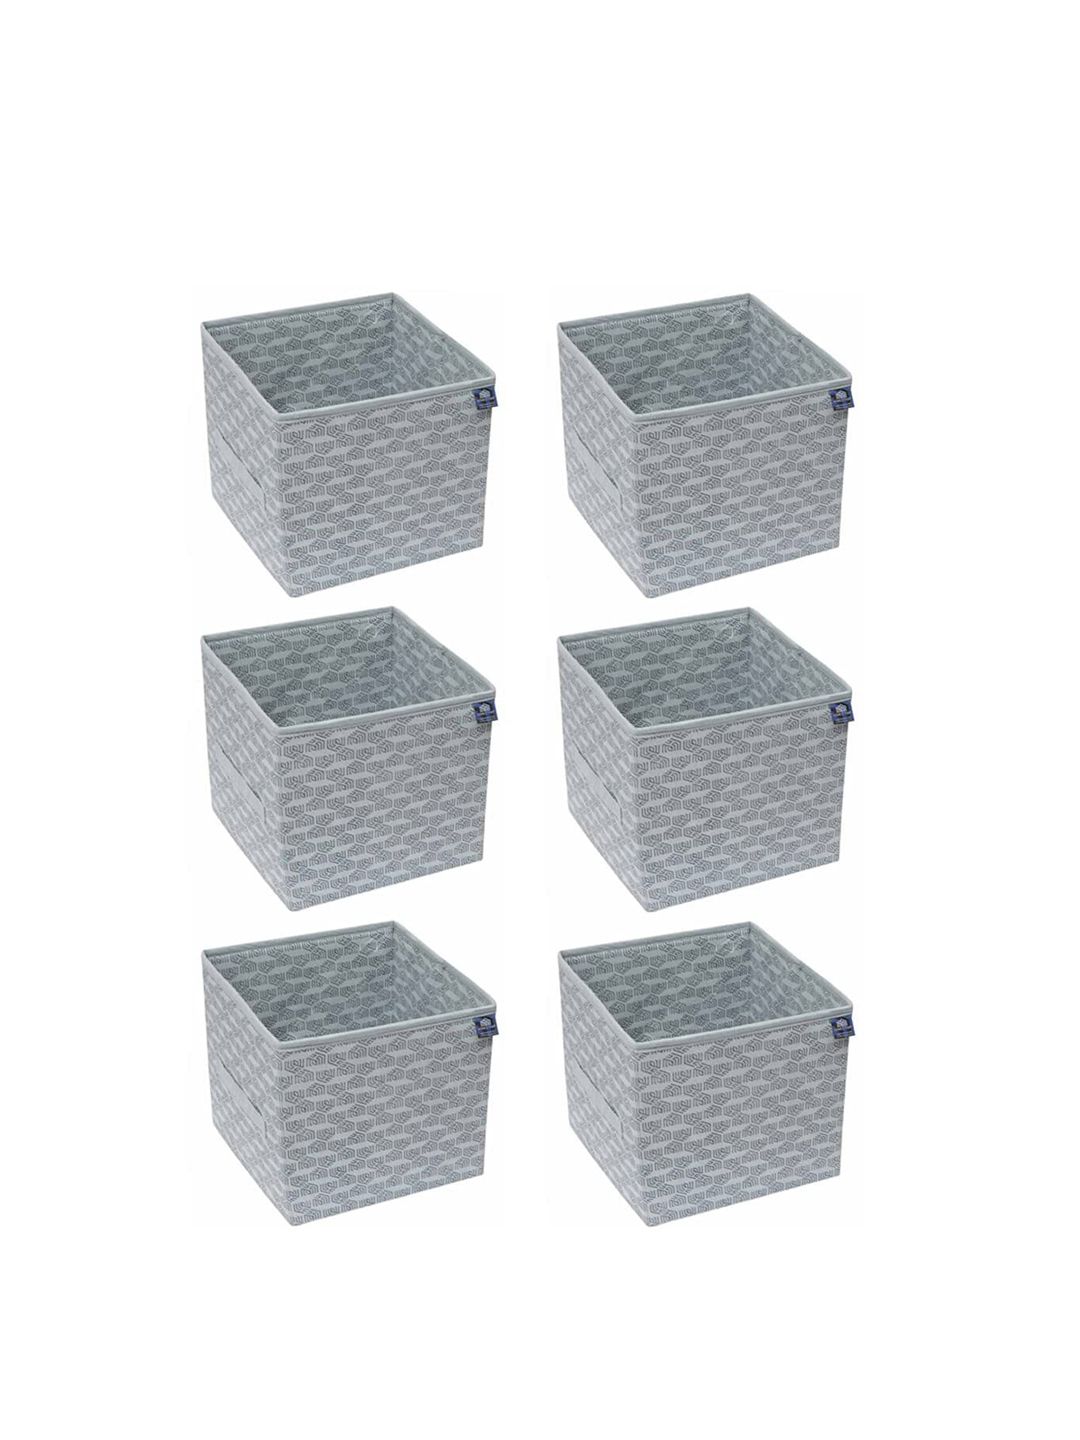 HOMESTRAP Set of 6 Foldable Storage Cube Organiser Box Price in India